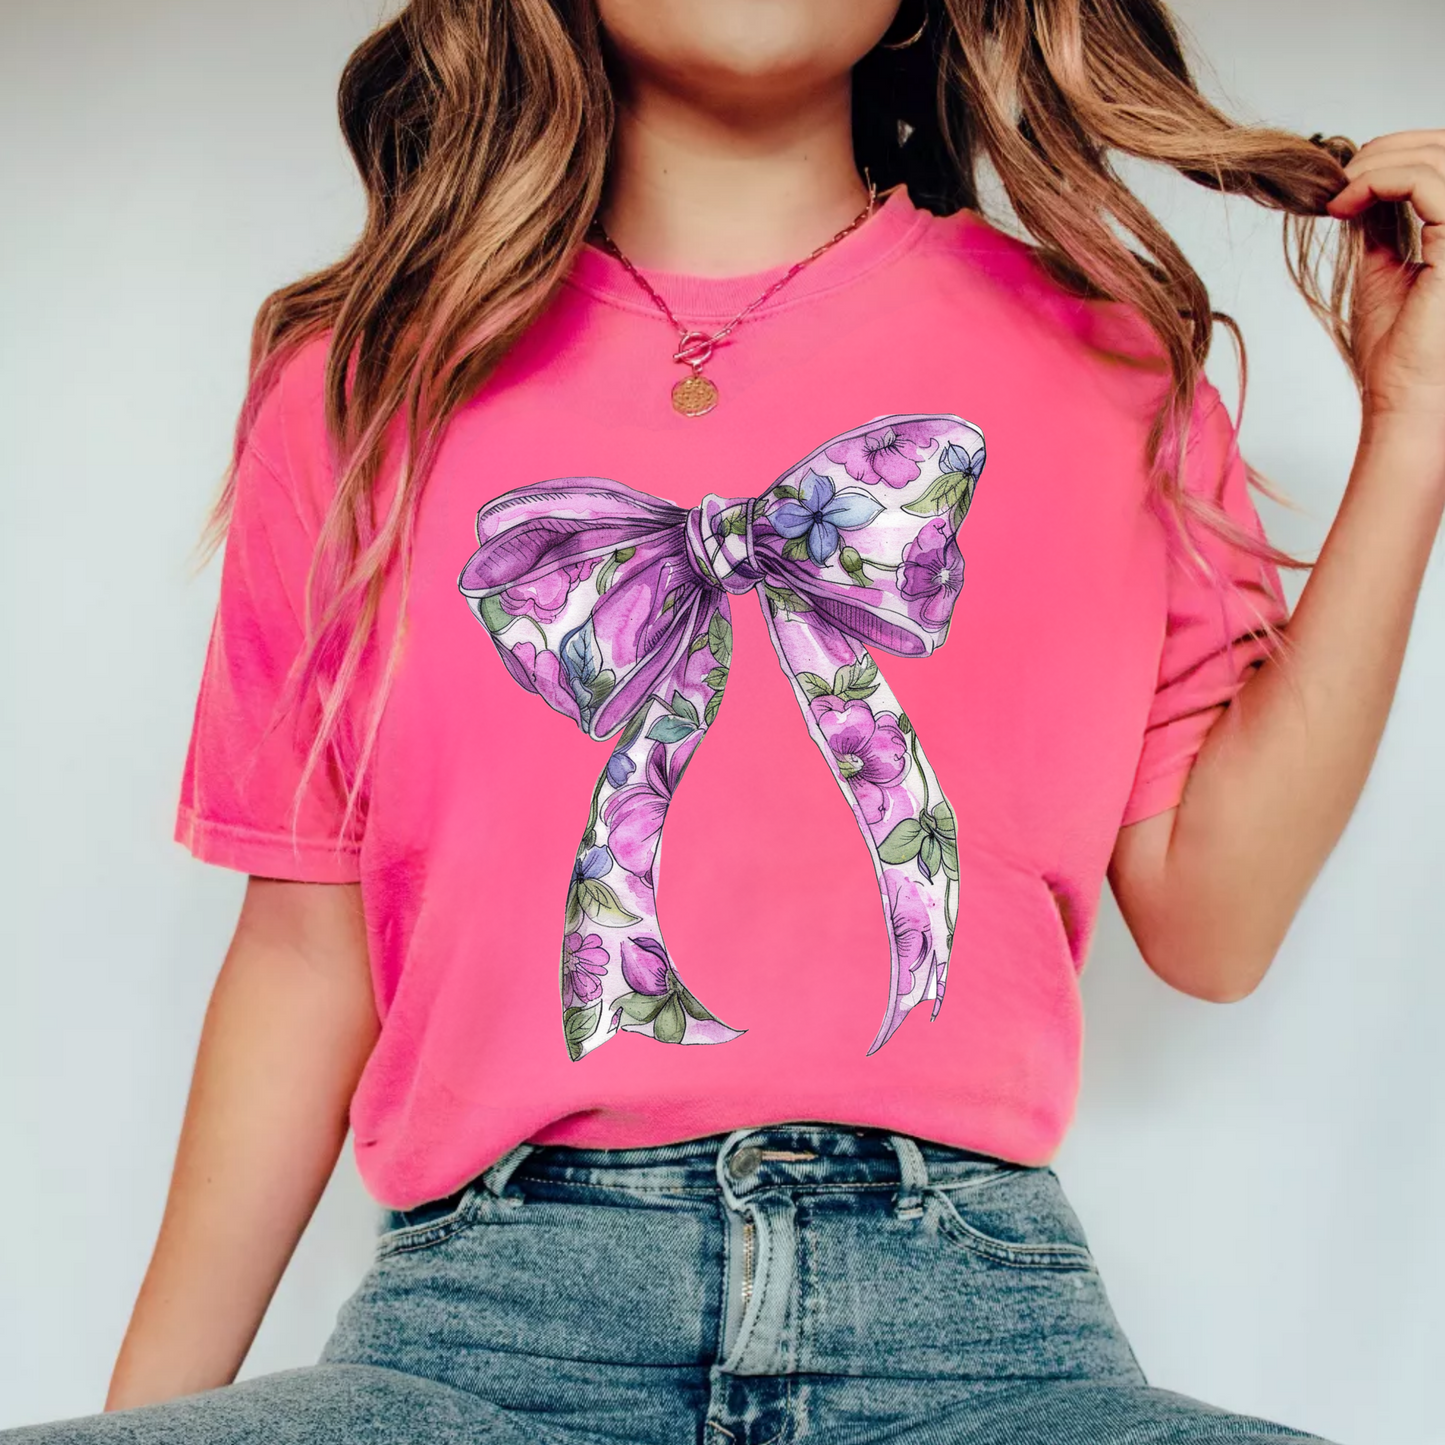 (shirt not included) Floral Purple Bow - Clear Film Transfer